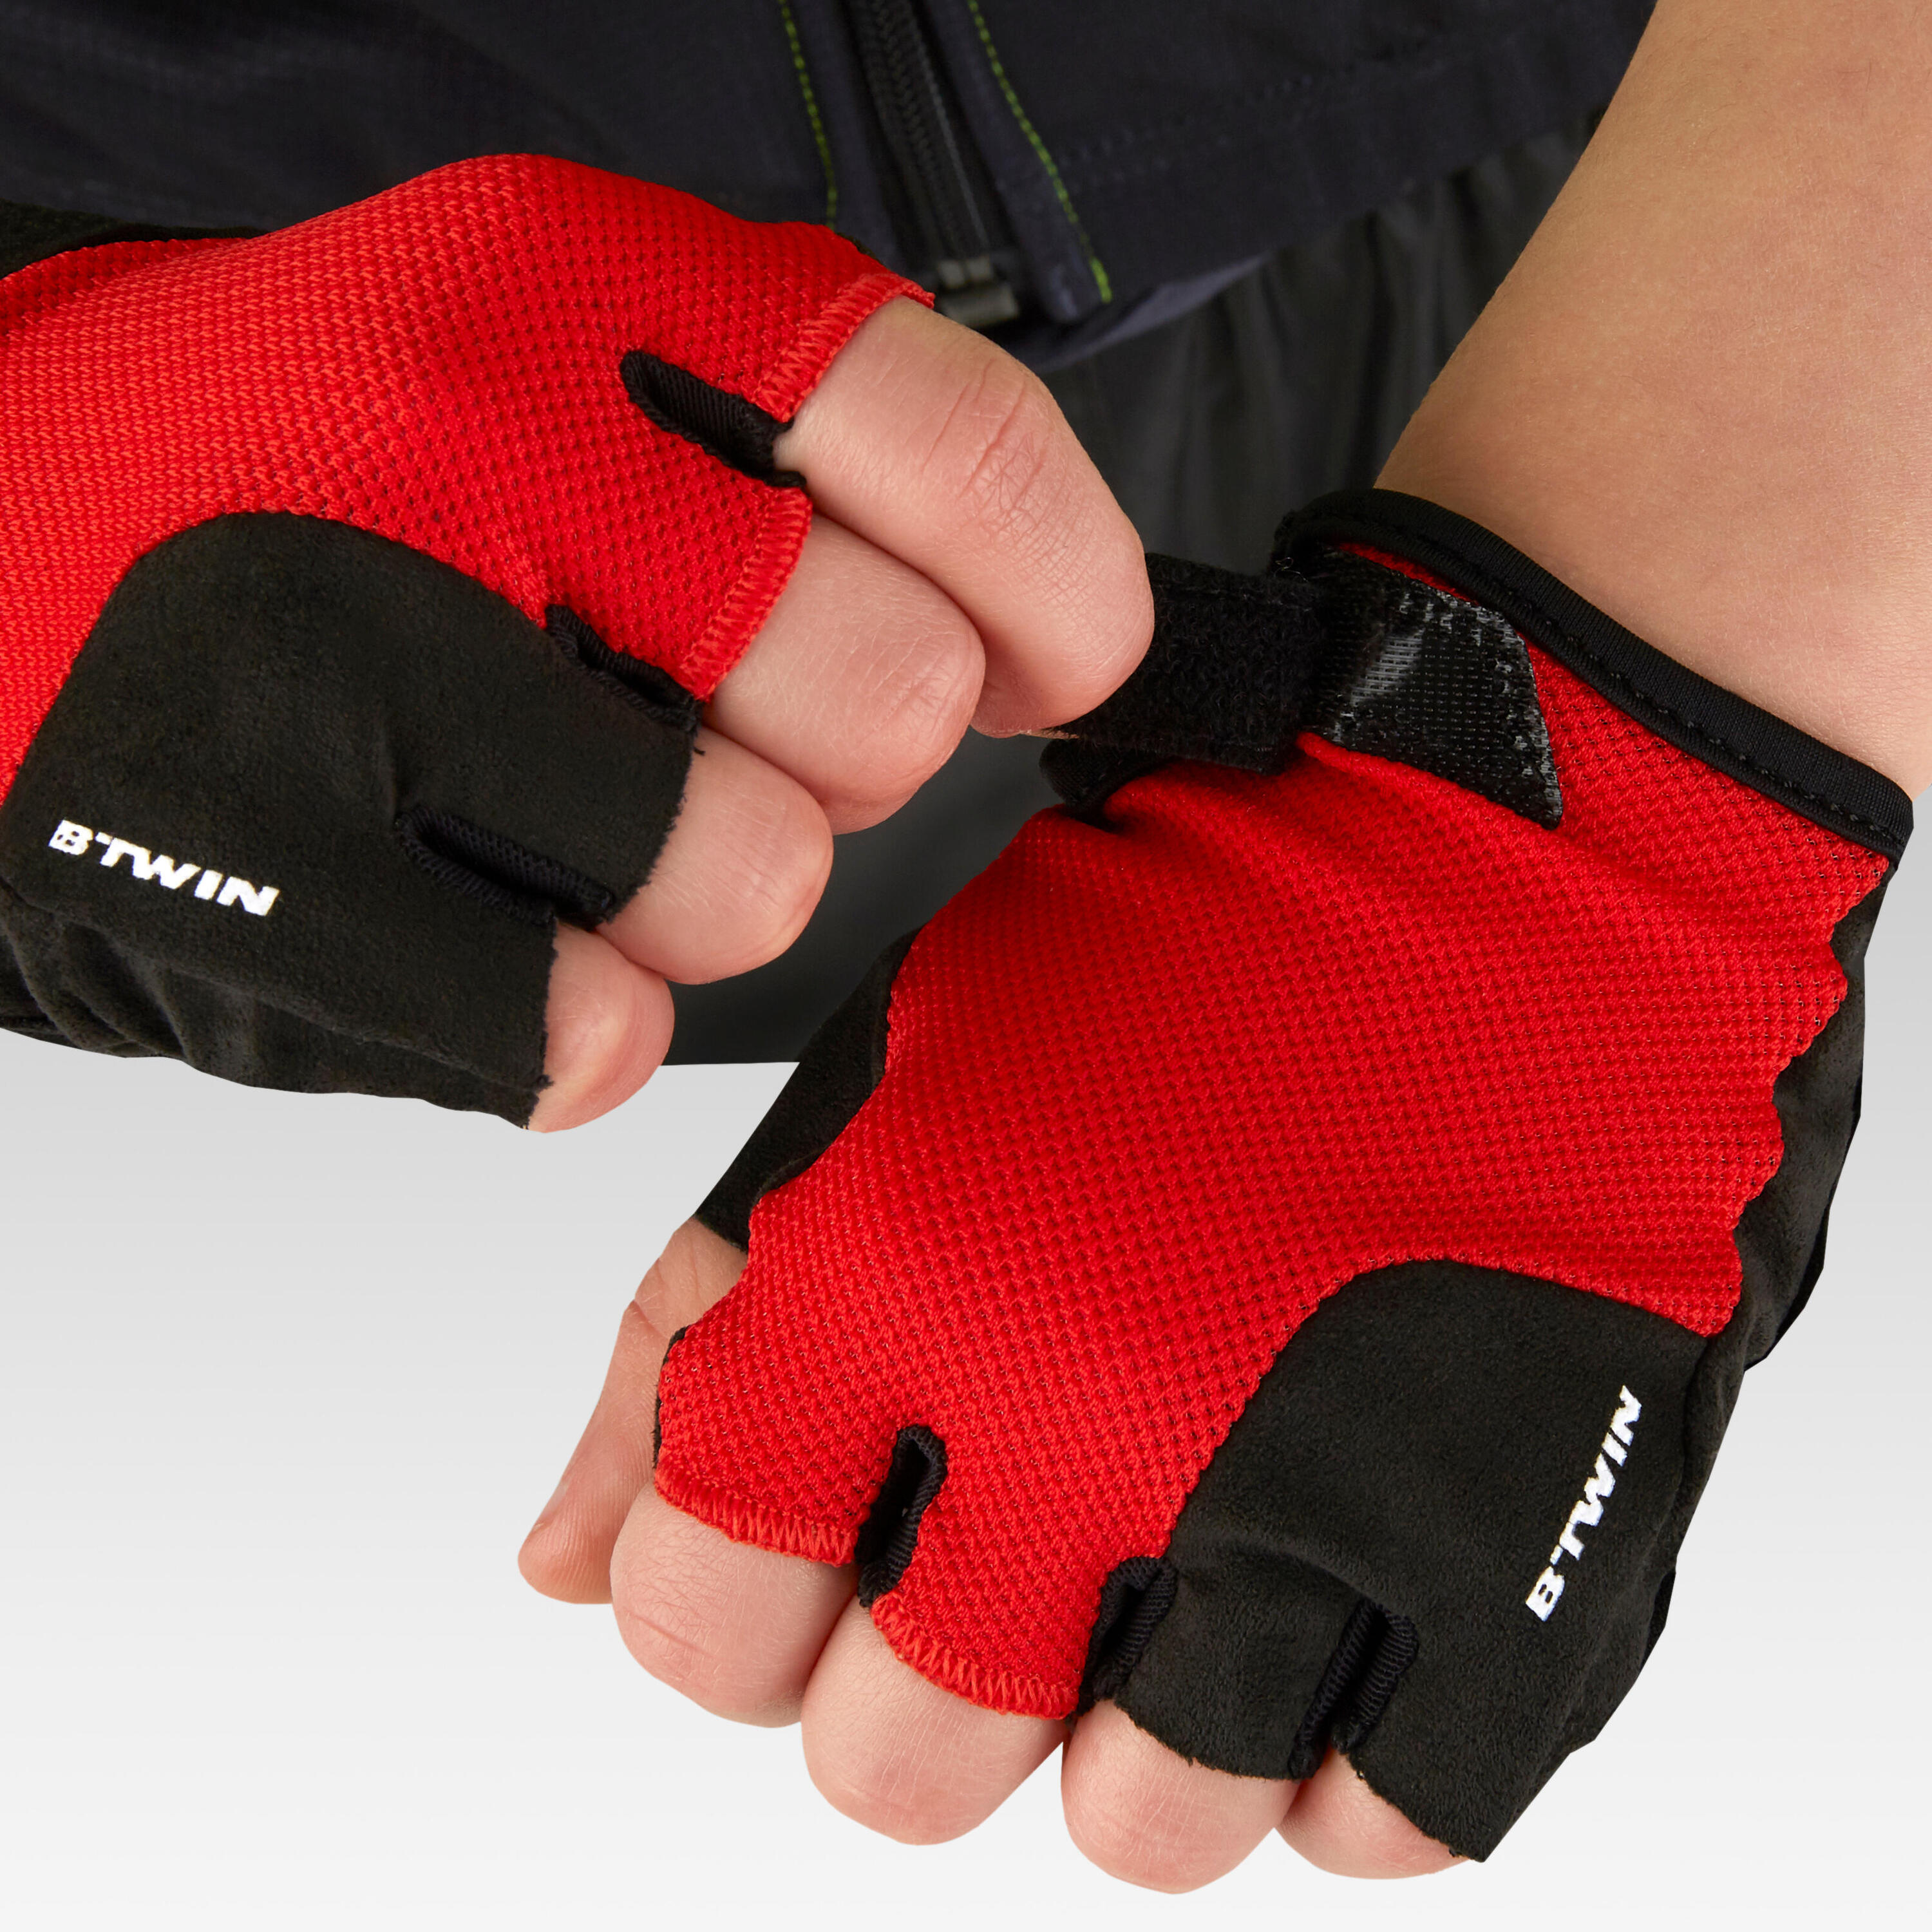 500 Kids' Fingerless Cycling Gloves 8-12 - Red 4/5